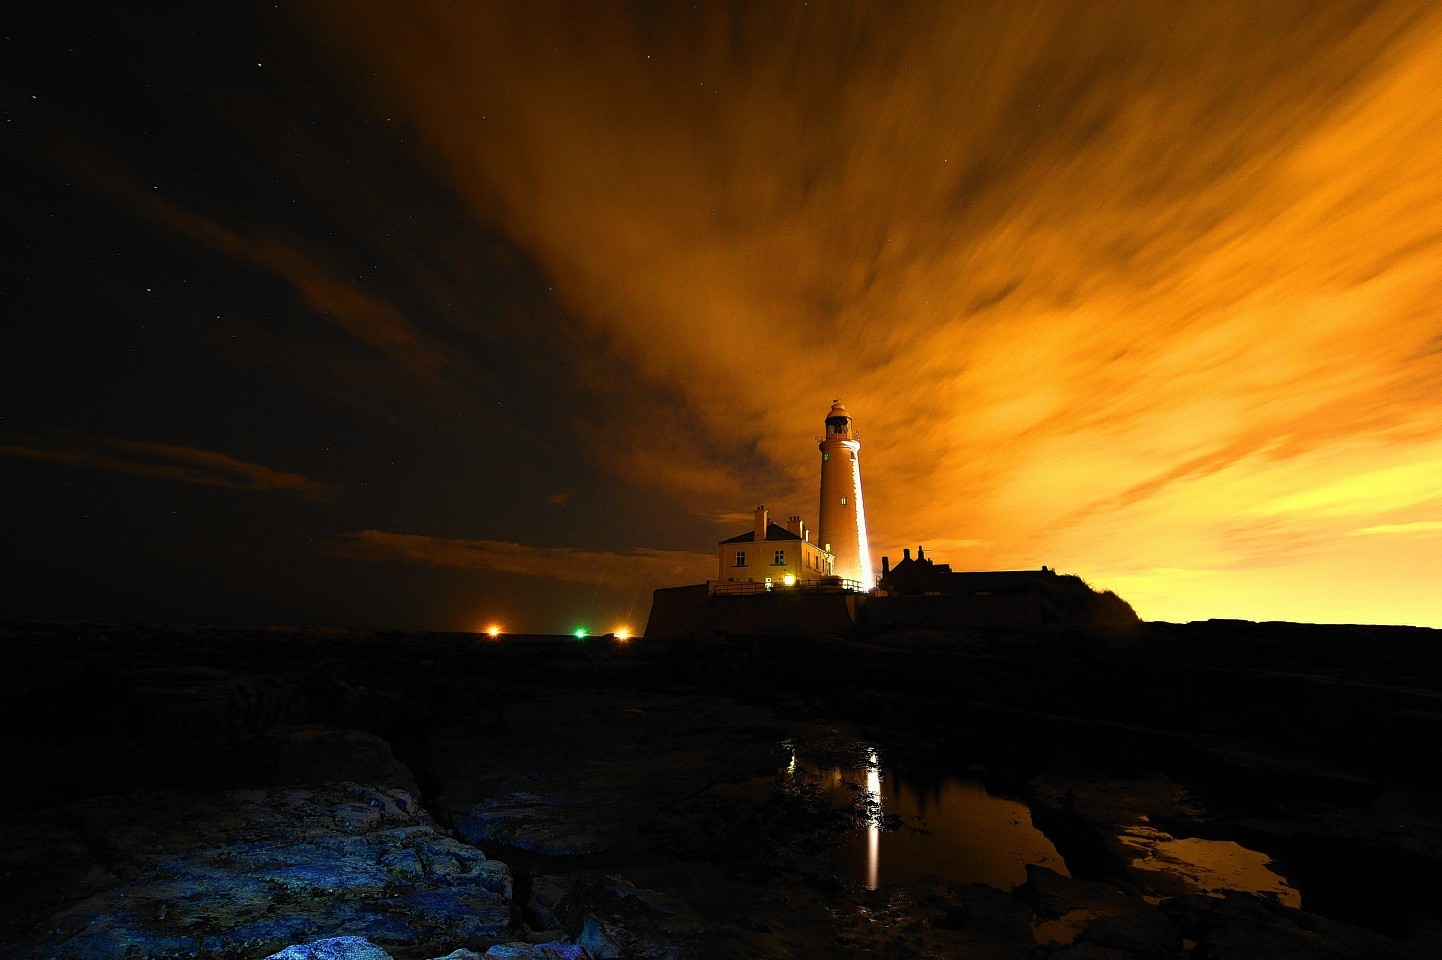 St Mary's Lighthouse in Whitley Bay, East of Newcastle.